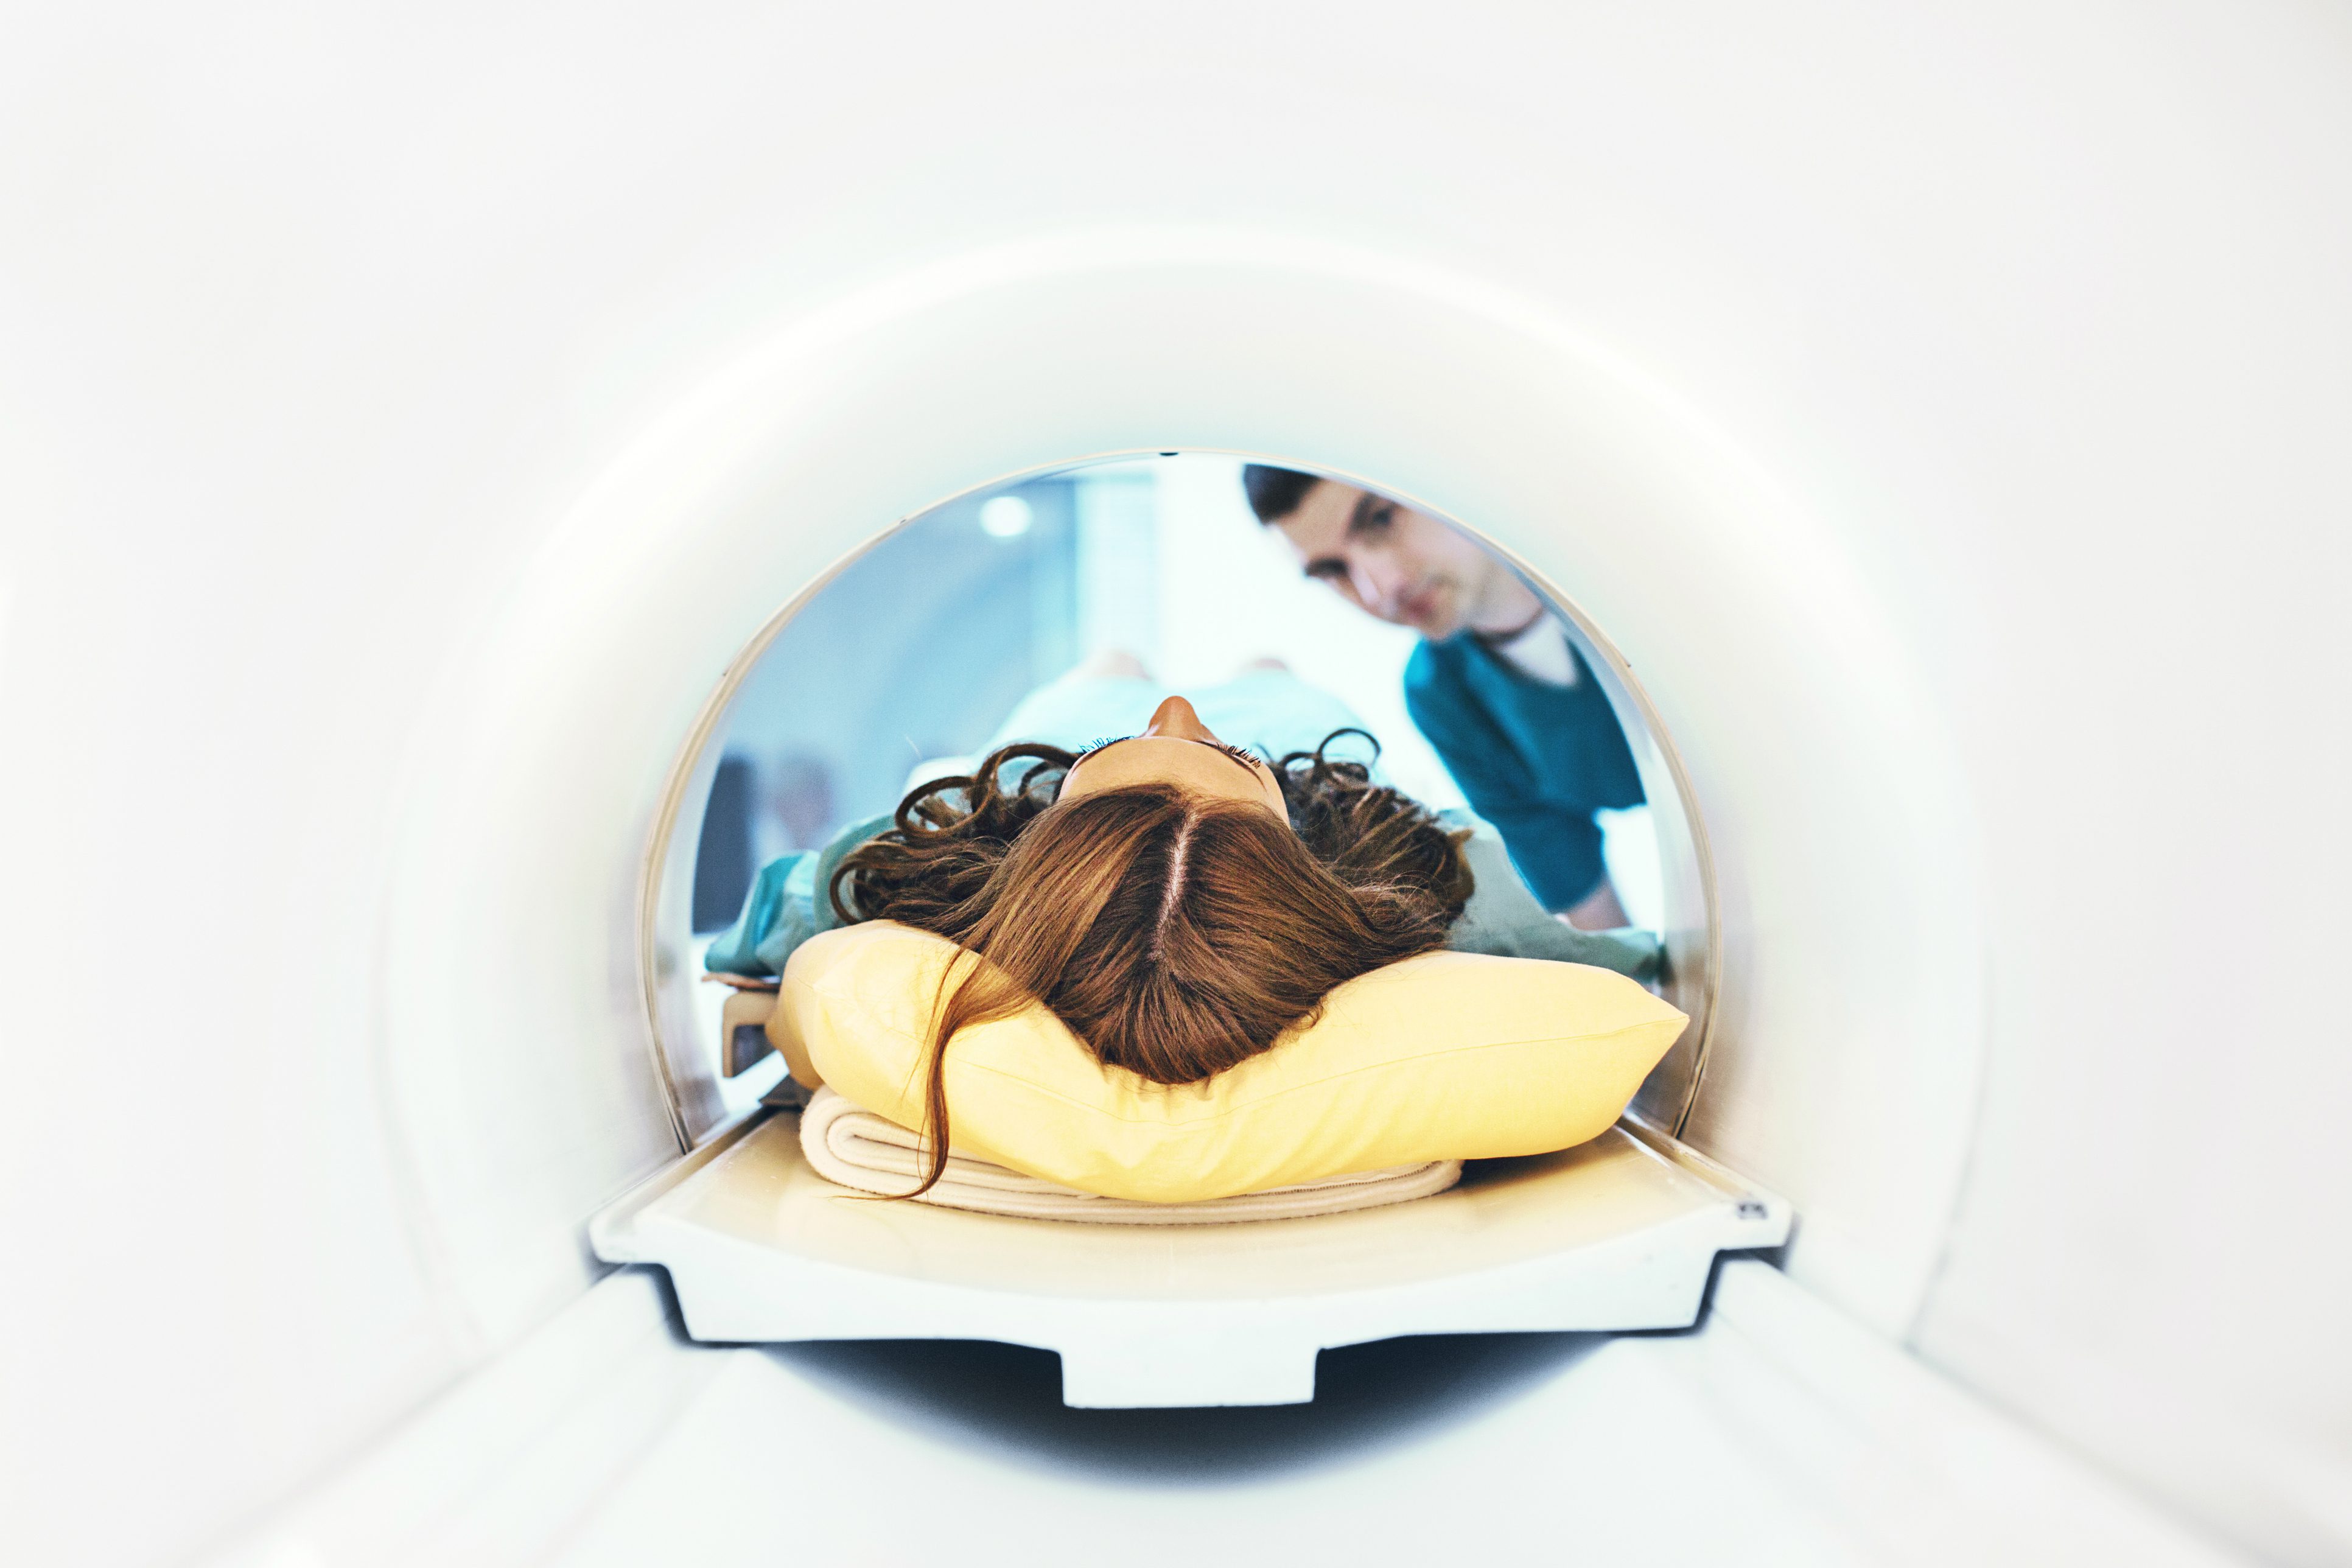 Woman in an MRI machine with an attendant looking on